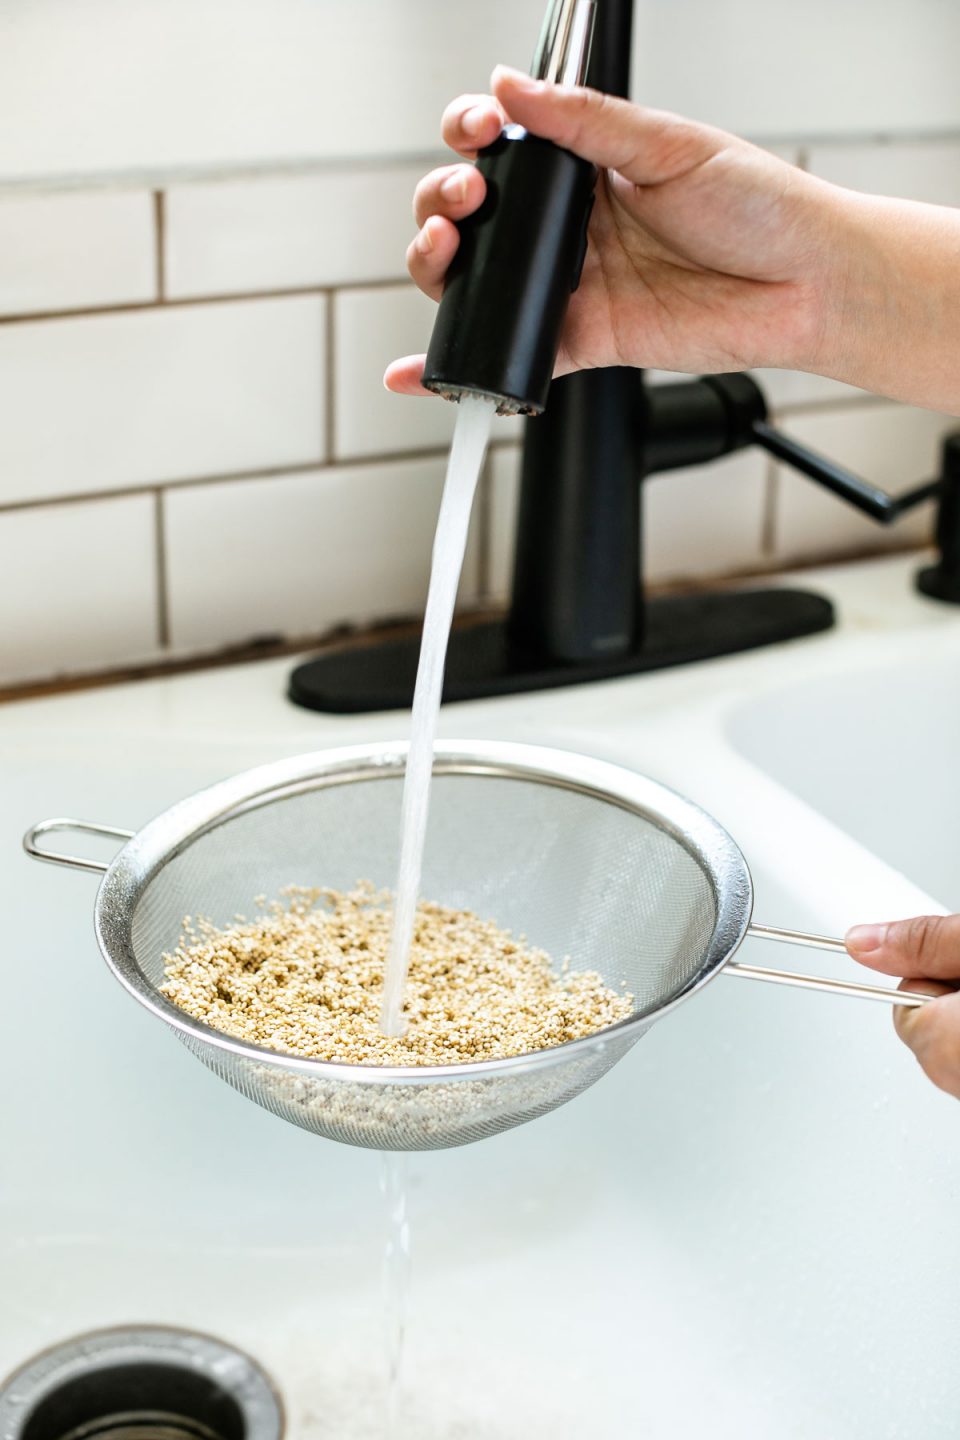 A woman's hand rinses a cup of white quinoa in a fine mesh sieve. Jess is holding the sieve over the sink as the sink sprayer rinses the quinoa with water that is draining through the sieve into the sink.